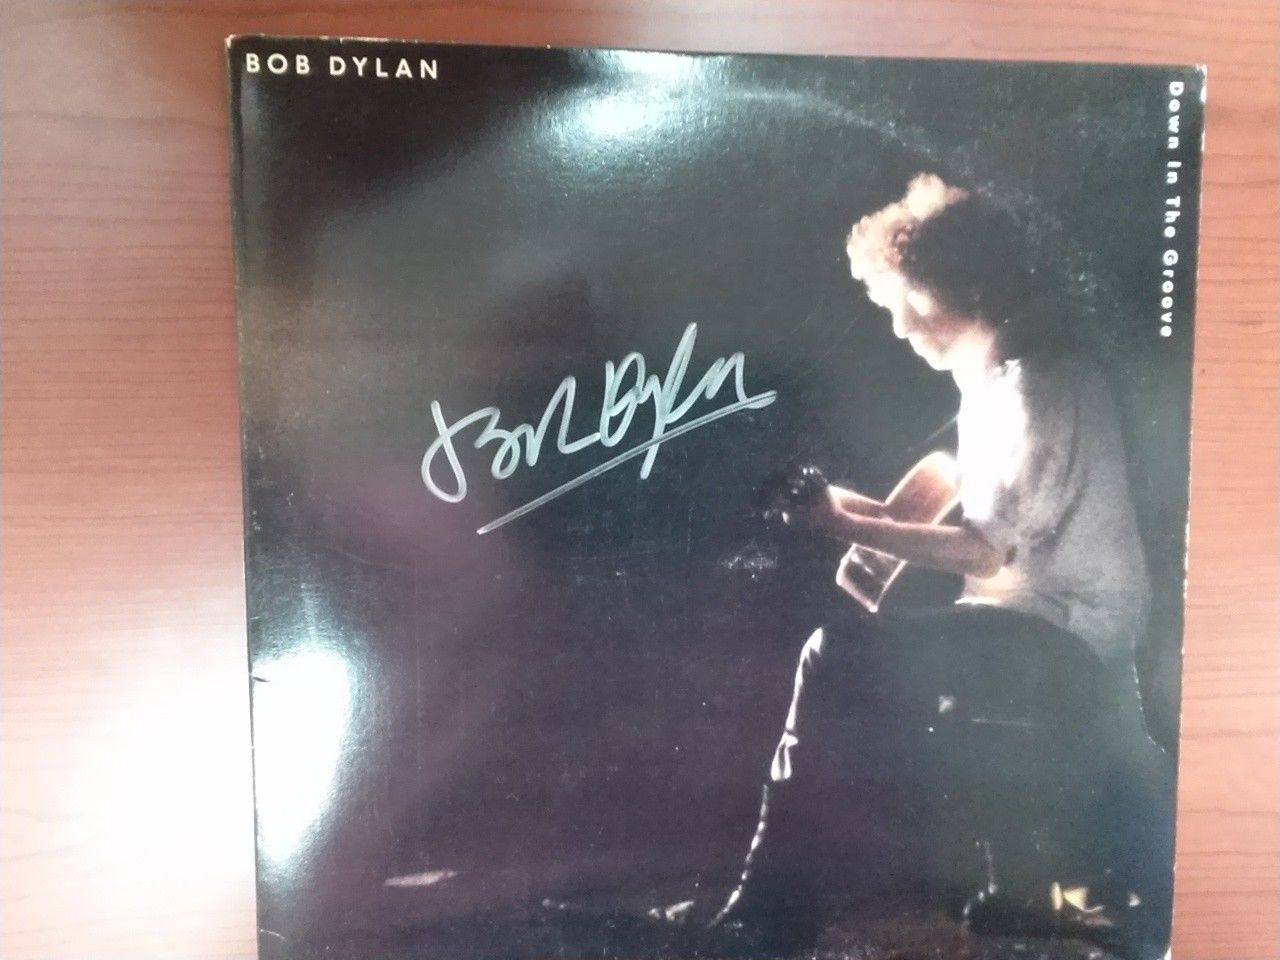 bob-dylan-down-in-the-groove-12-vinyl-record-lp-not-a-cd-highway-61-revisited